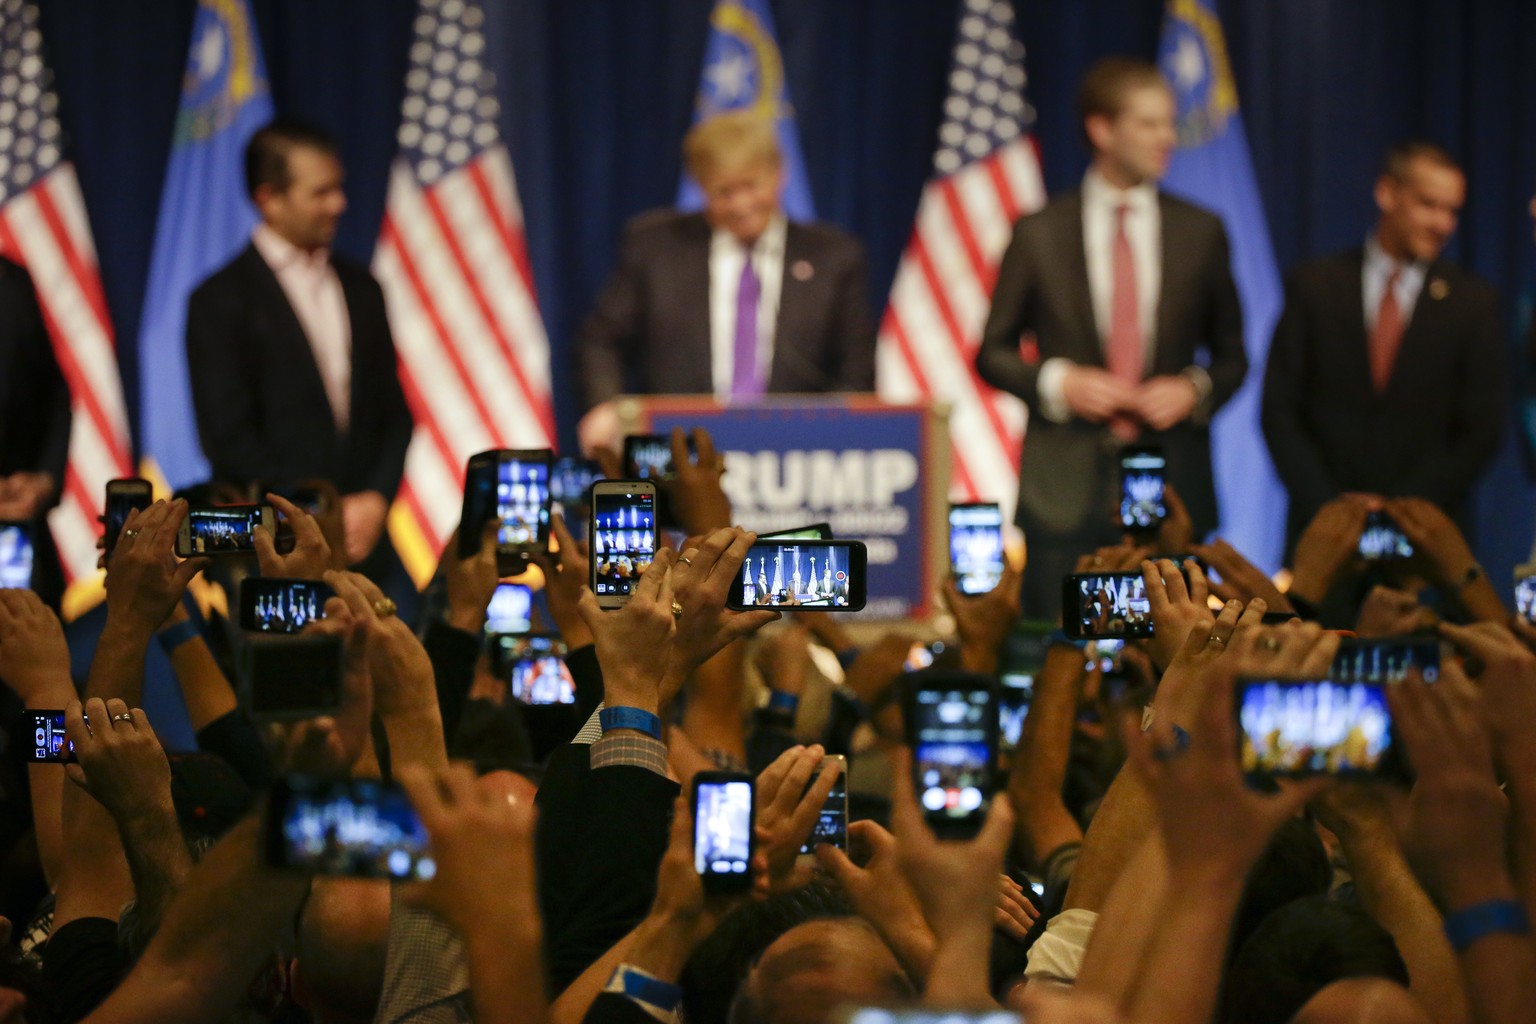 Supporters hold up their smartphones to photograph Republican presidential candidate Donald Trump during a caucus night rally Tuesday, Feb. 23, 2016, in Las Vegas. (AP Photo/Jae C. Hong)